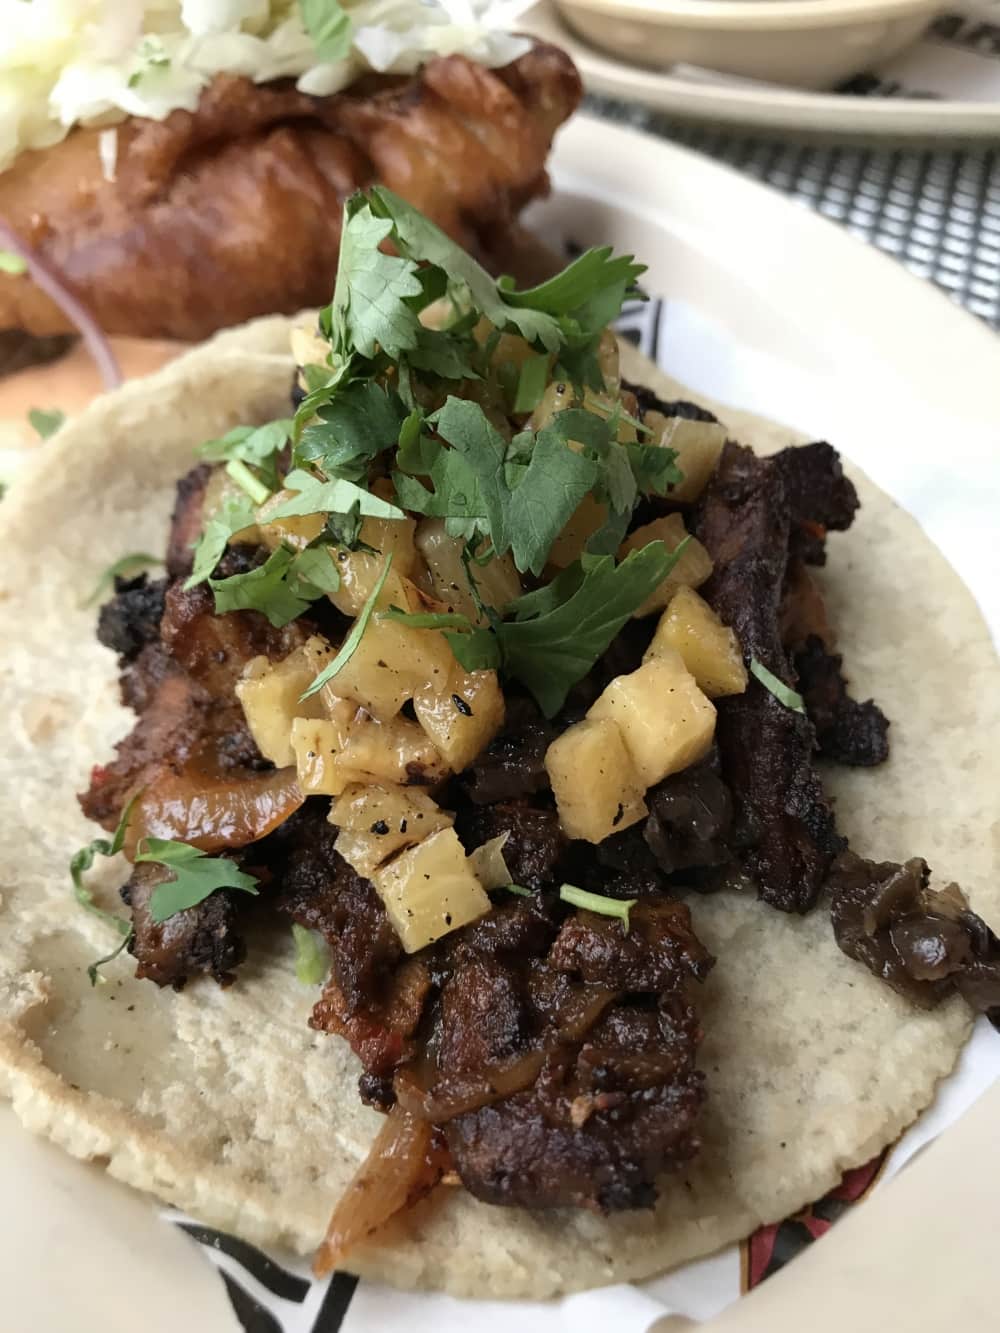 Taco Al Pastor which is a marinated pork shoulder taco topped with grilled pineapple, grilled onions, and cilantro from Big Star Taco in Chicago, IL.